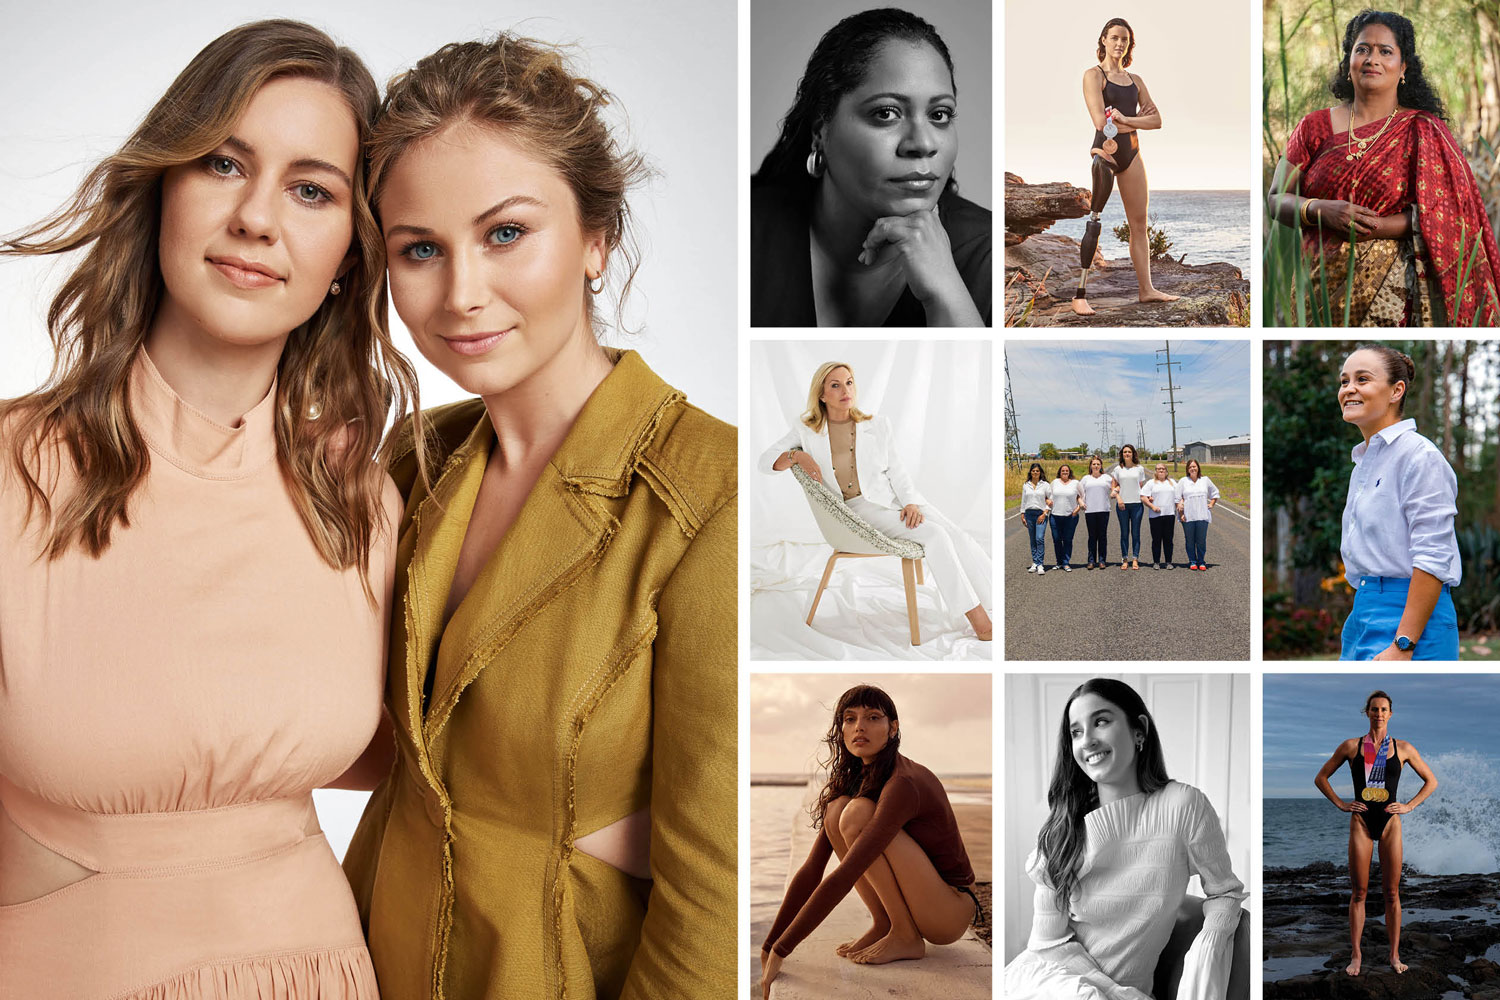 Introducing marie claire’s 2021 ‘Women Of The Year’